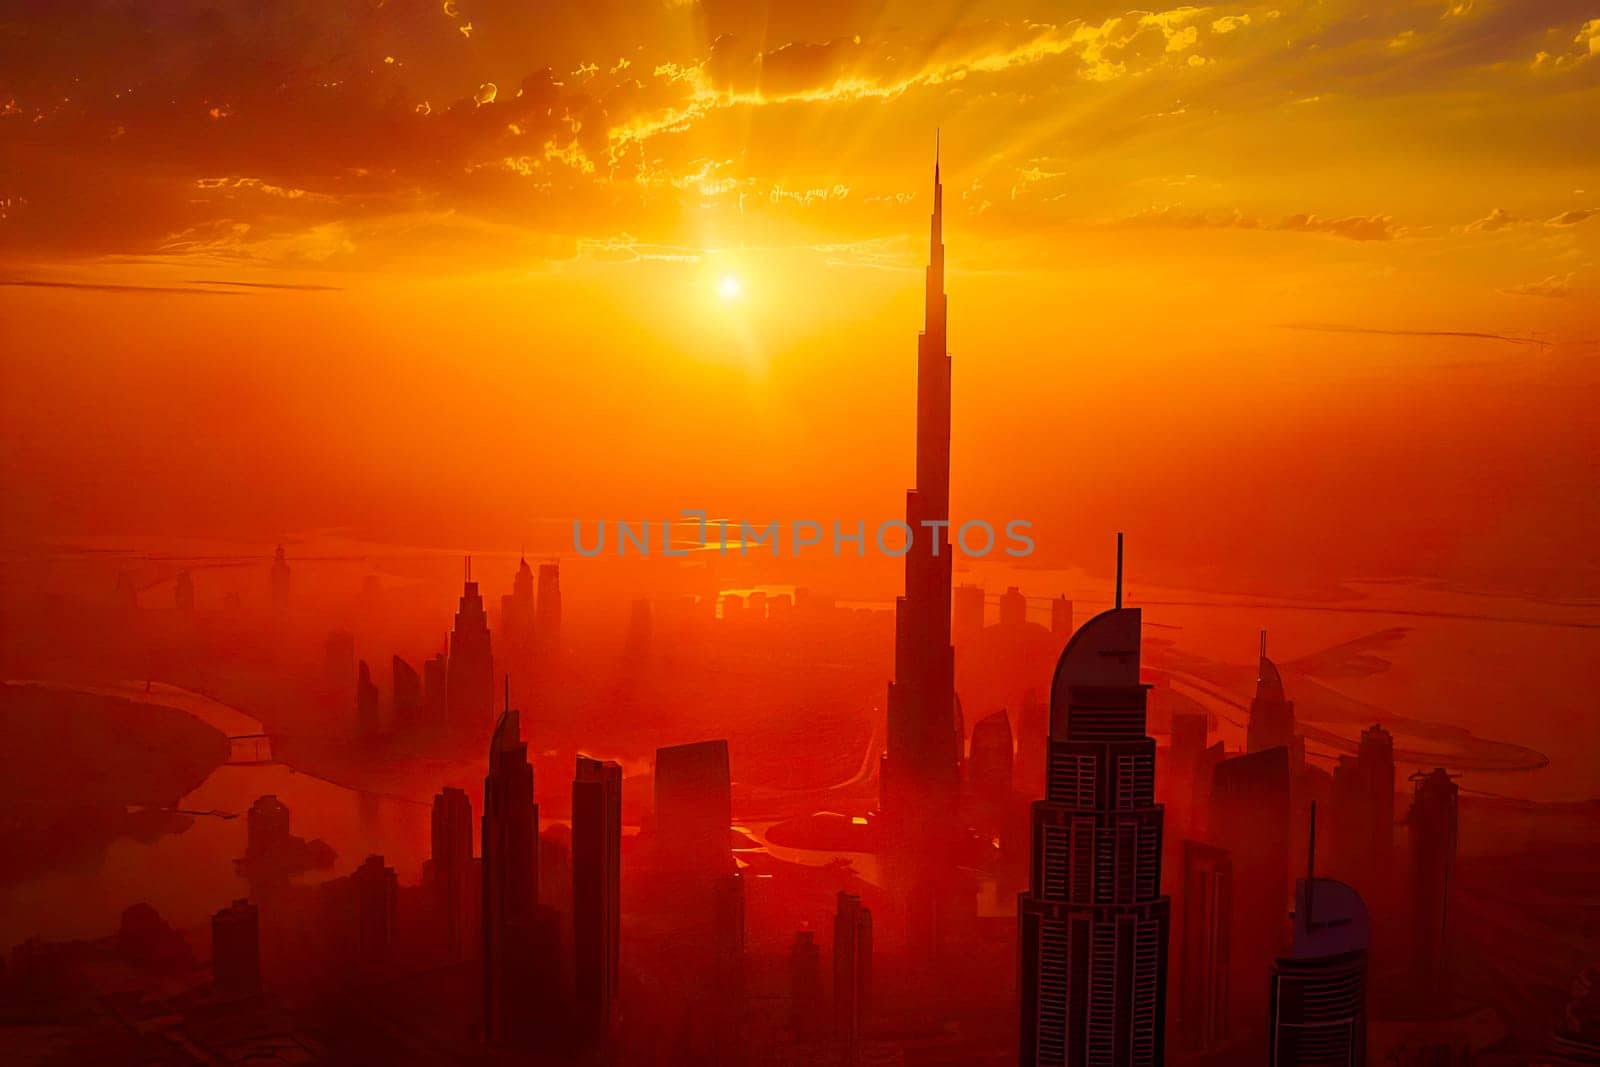 The sun is setting over a city with tall buildings, casting a warm glow on the urban landscape.